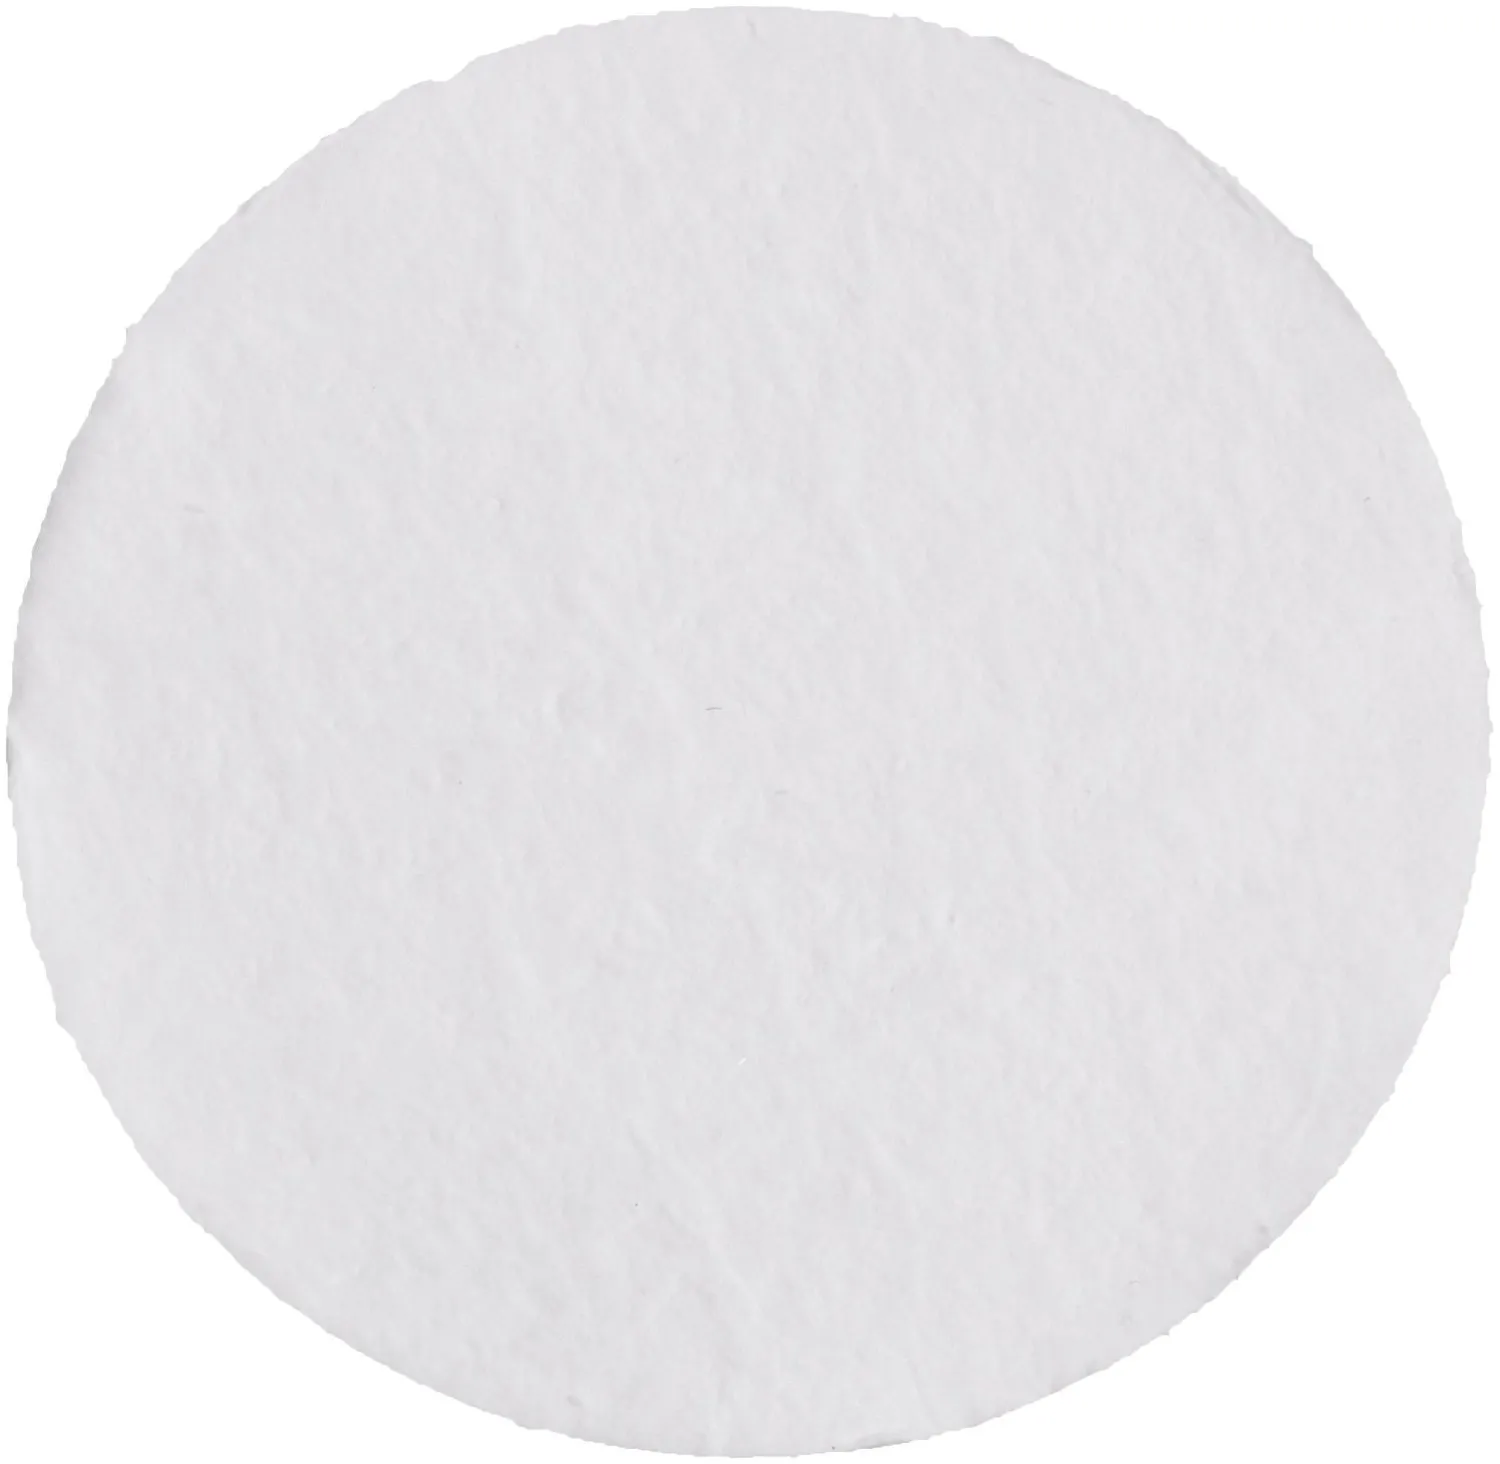 GE Healthcare - From: 5201-090 To: 5230-500 - Ge Healthcare Filter Paper, 11cm, Grade 201, 100/pk